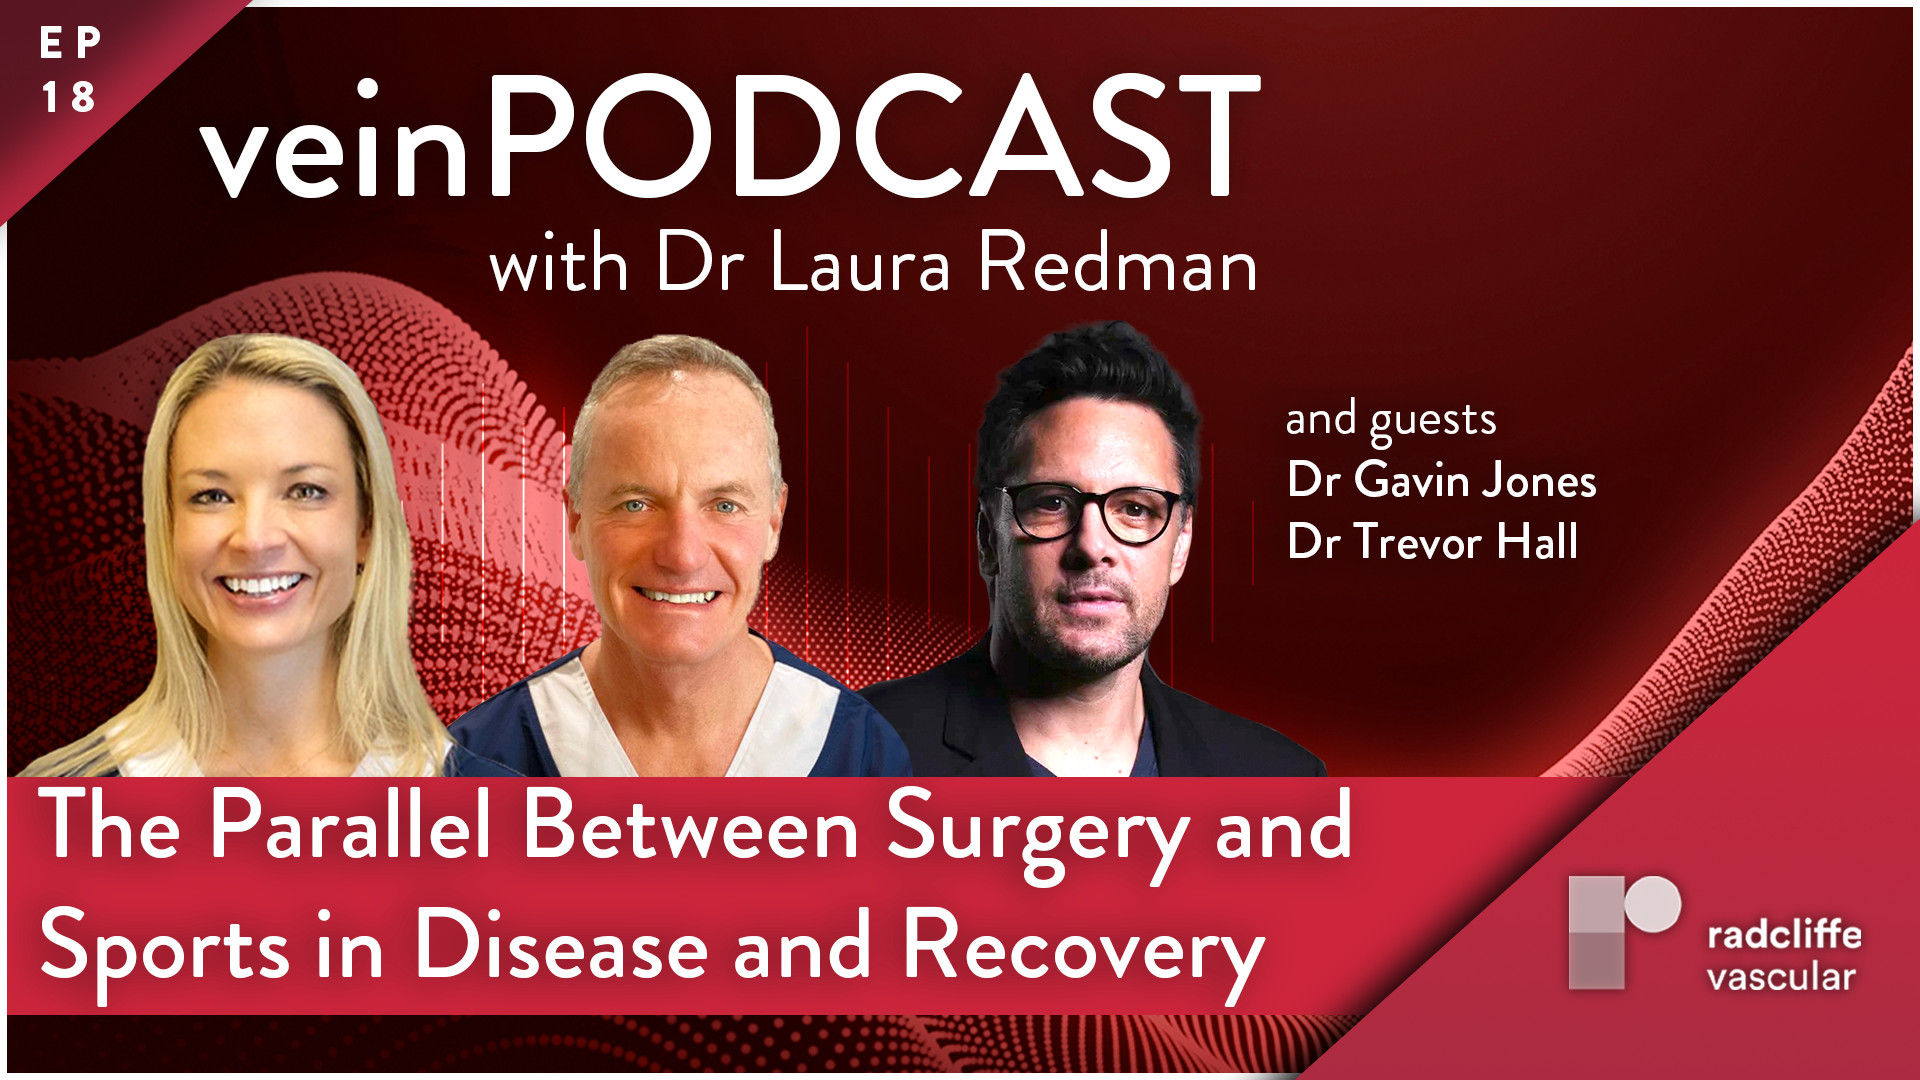 Ep 18: The Parallel Between Surgery and Sports in Disease and Recovery